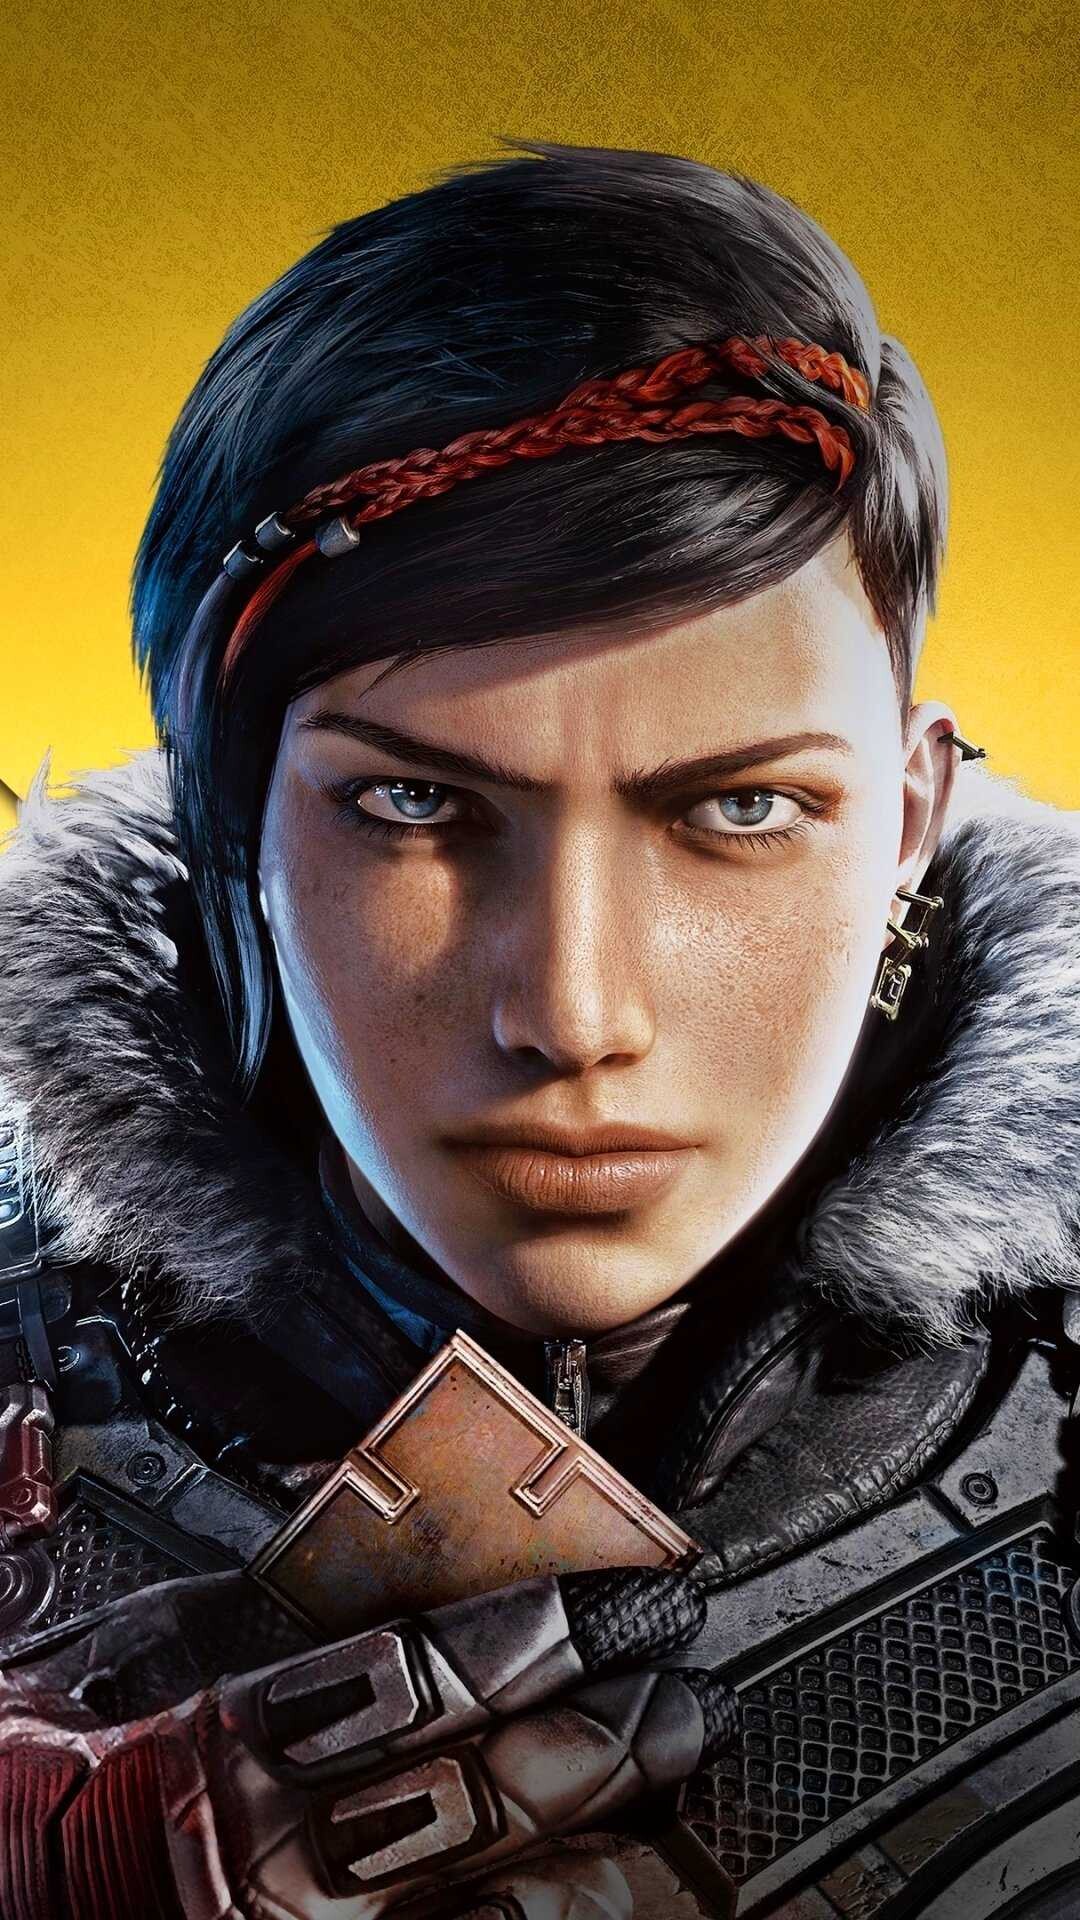 Gears of War: Kait Diaz, A media franchise centered on a series of video games created by Epic Games. 1080x1920 Full HD Background.